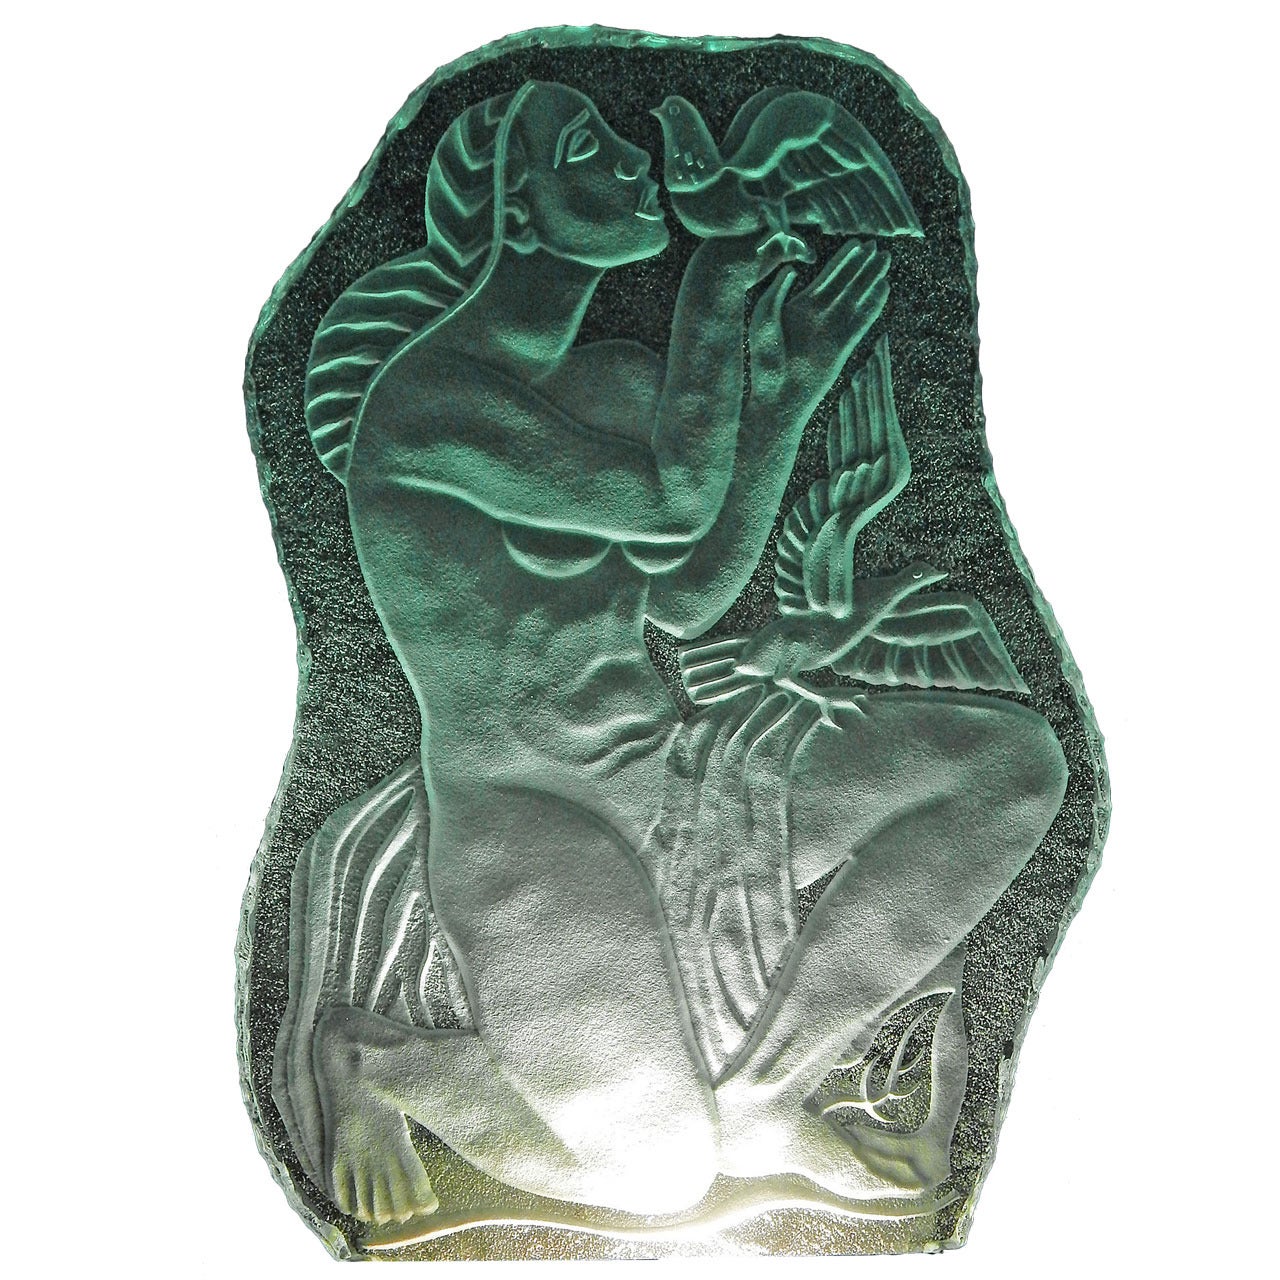 "Nude and Doves, " Important, Large Art Deco Sconce/Glass Sculpture by Torhamn For Sale